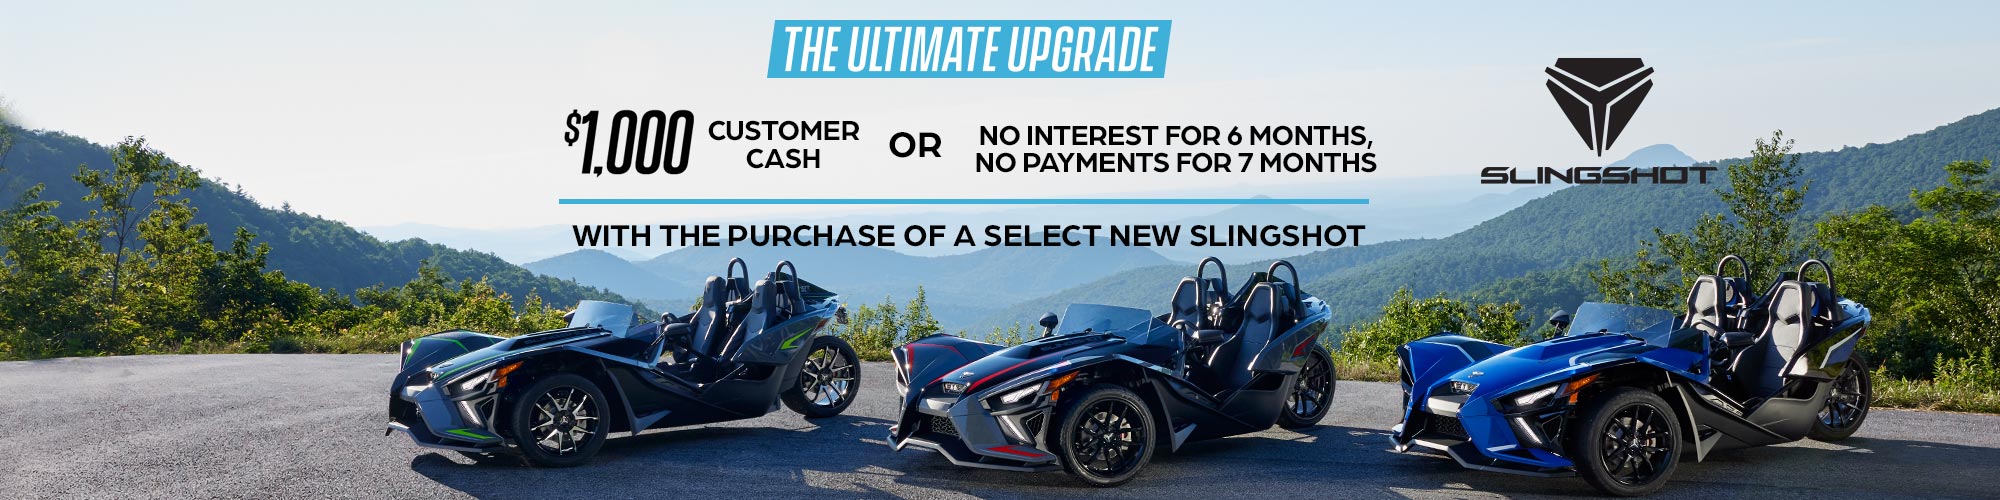 Slingshot - The Ultimate Upgrade at Friendly Powersports Slidell